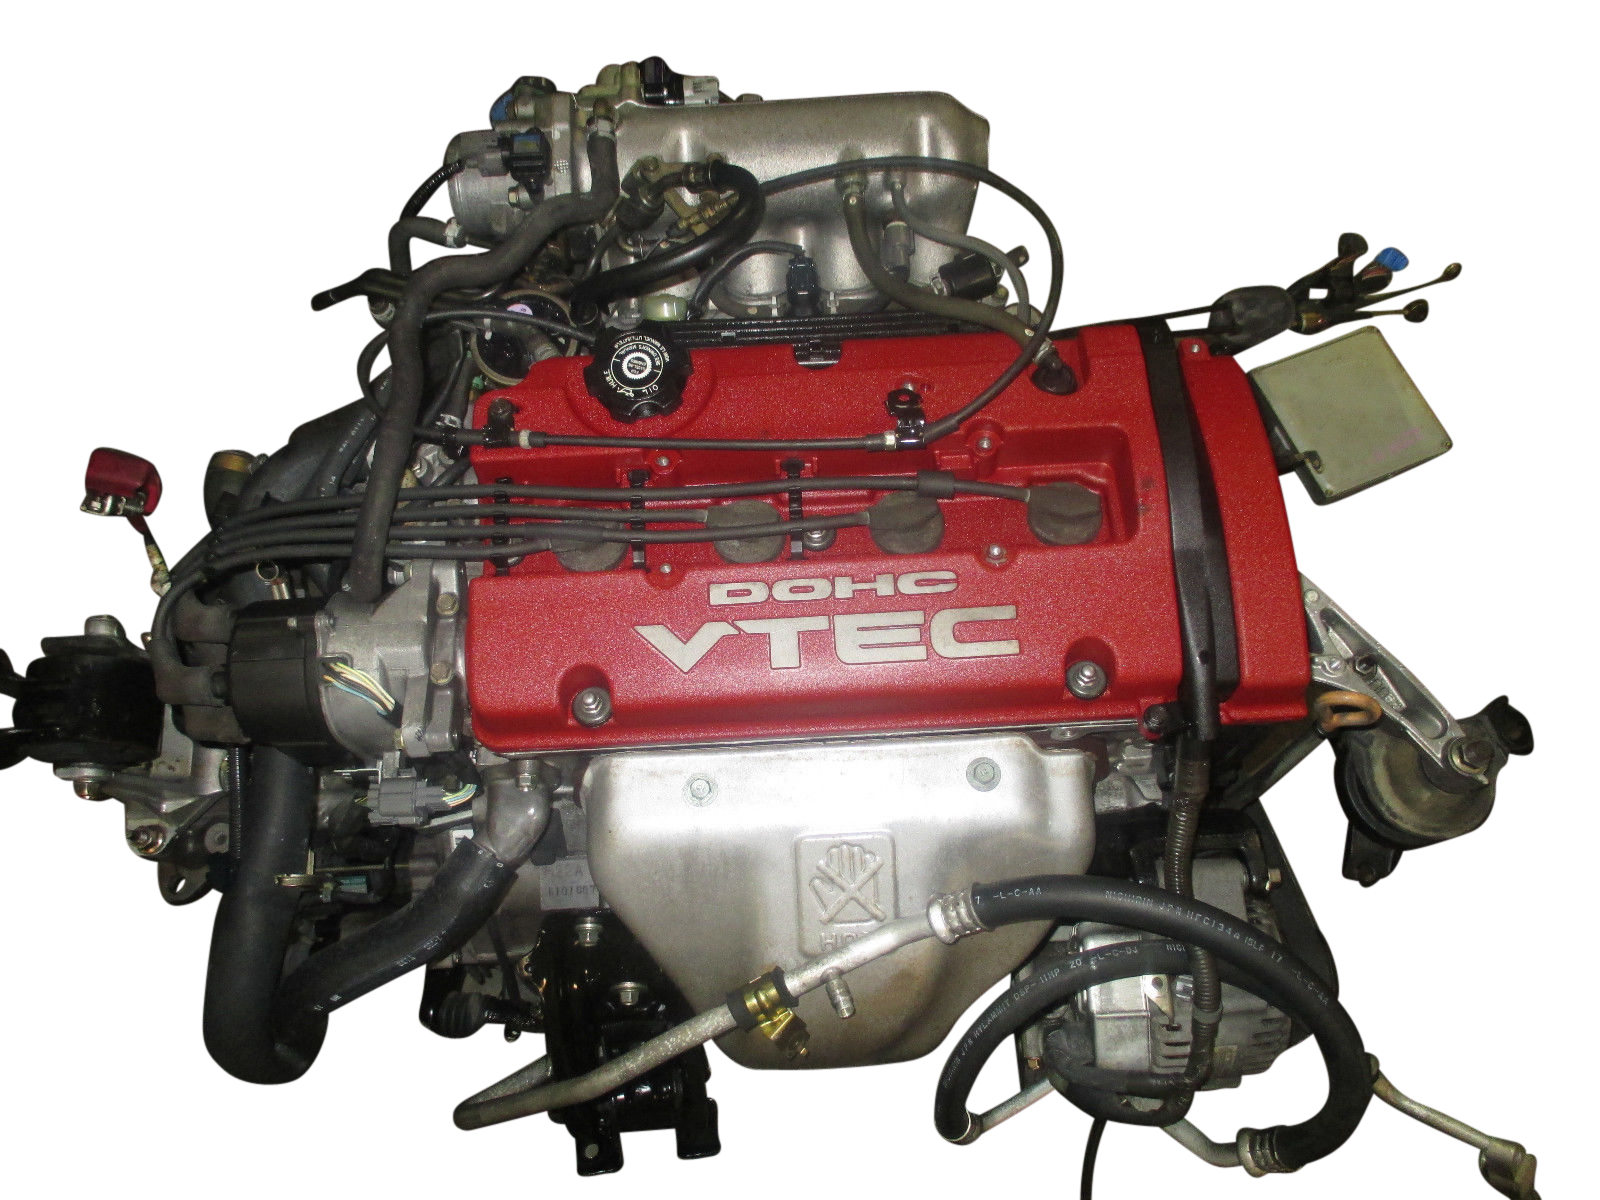 Honda H22A Type S engine from 